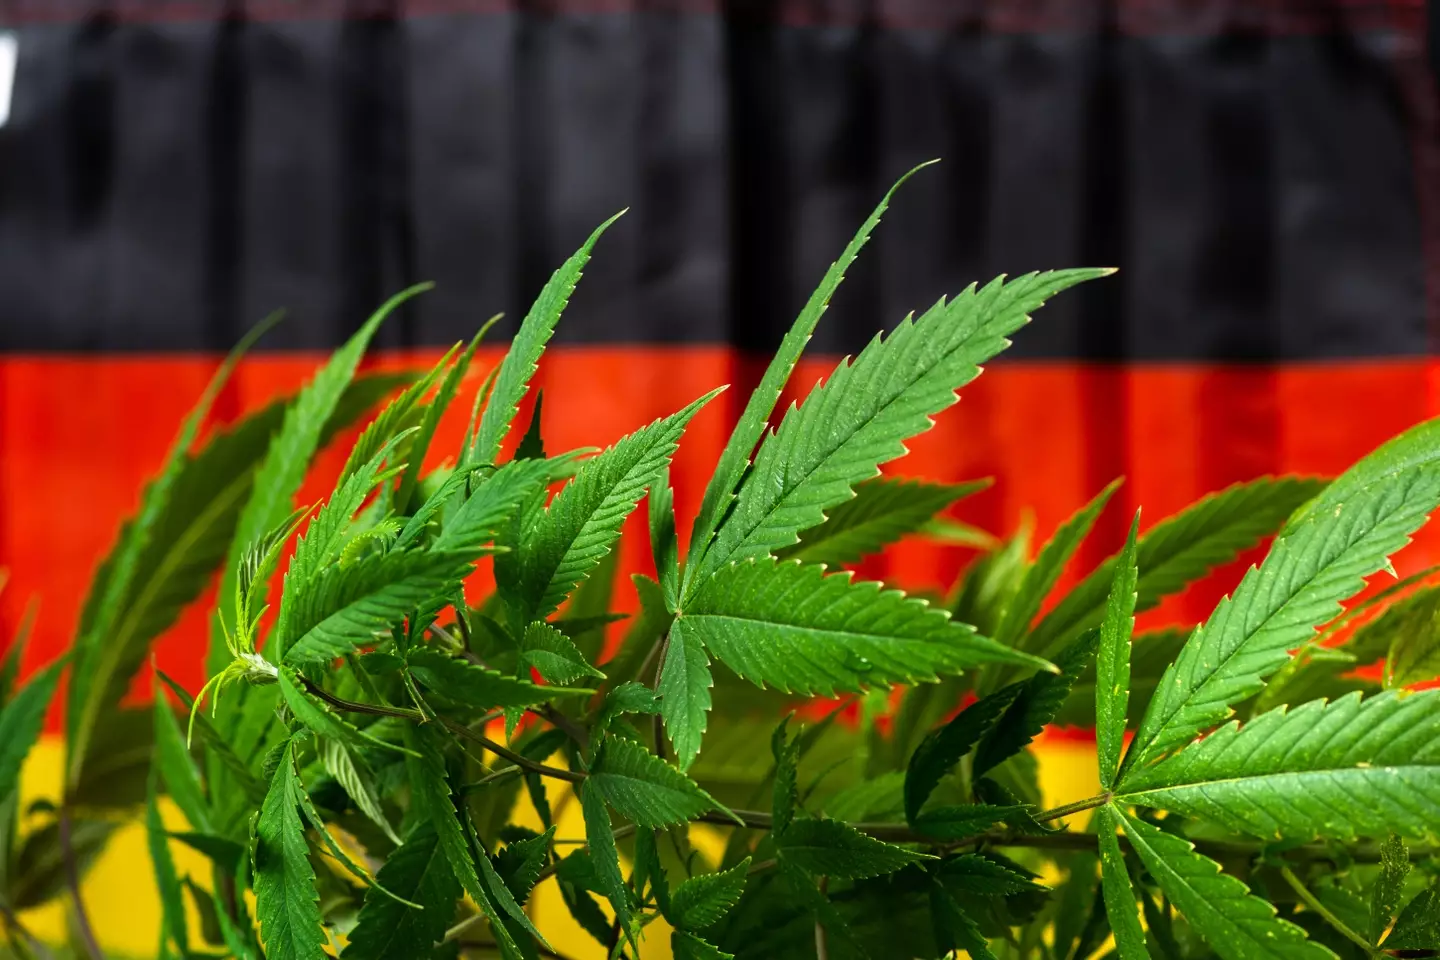 Germany is currently looking at changing the laws on cannabis.